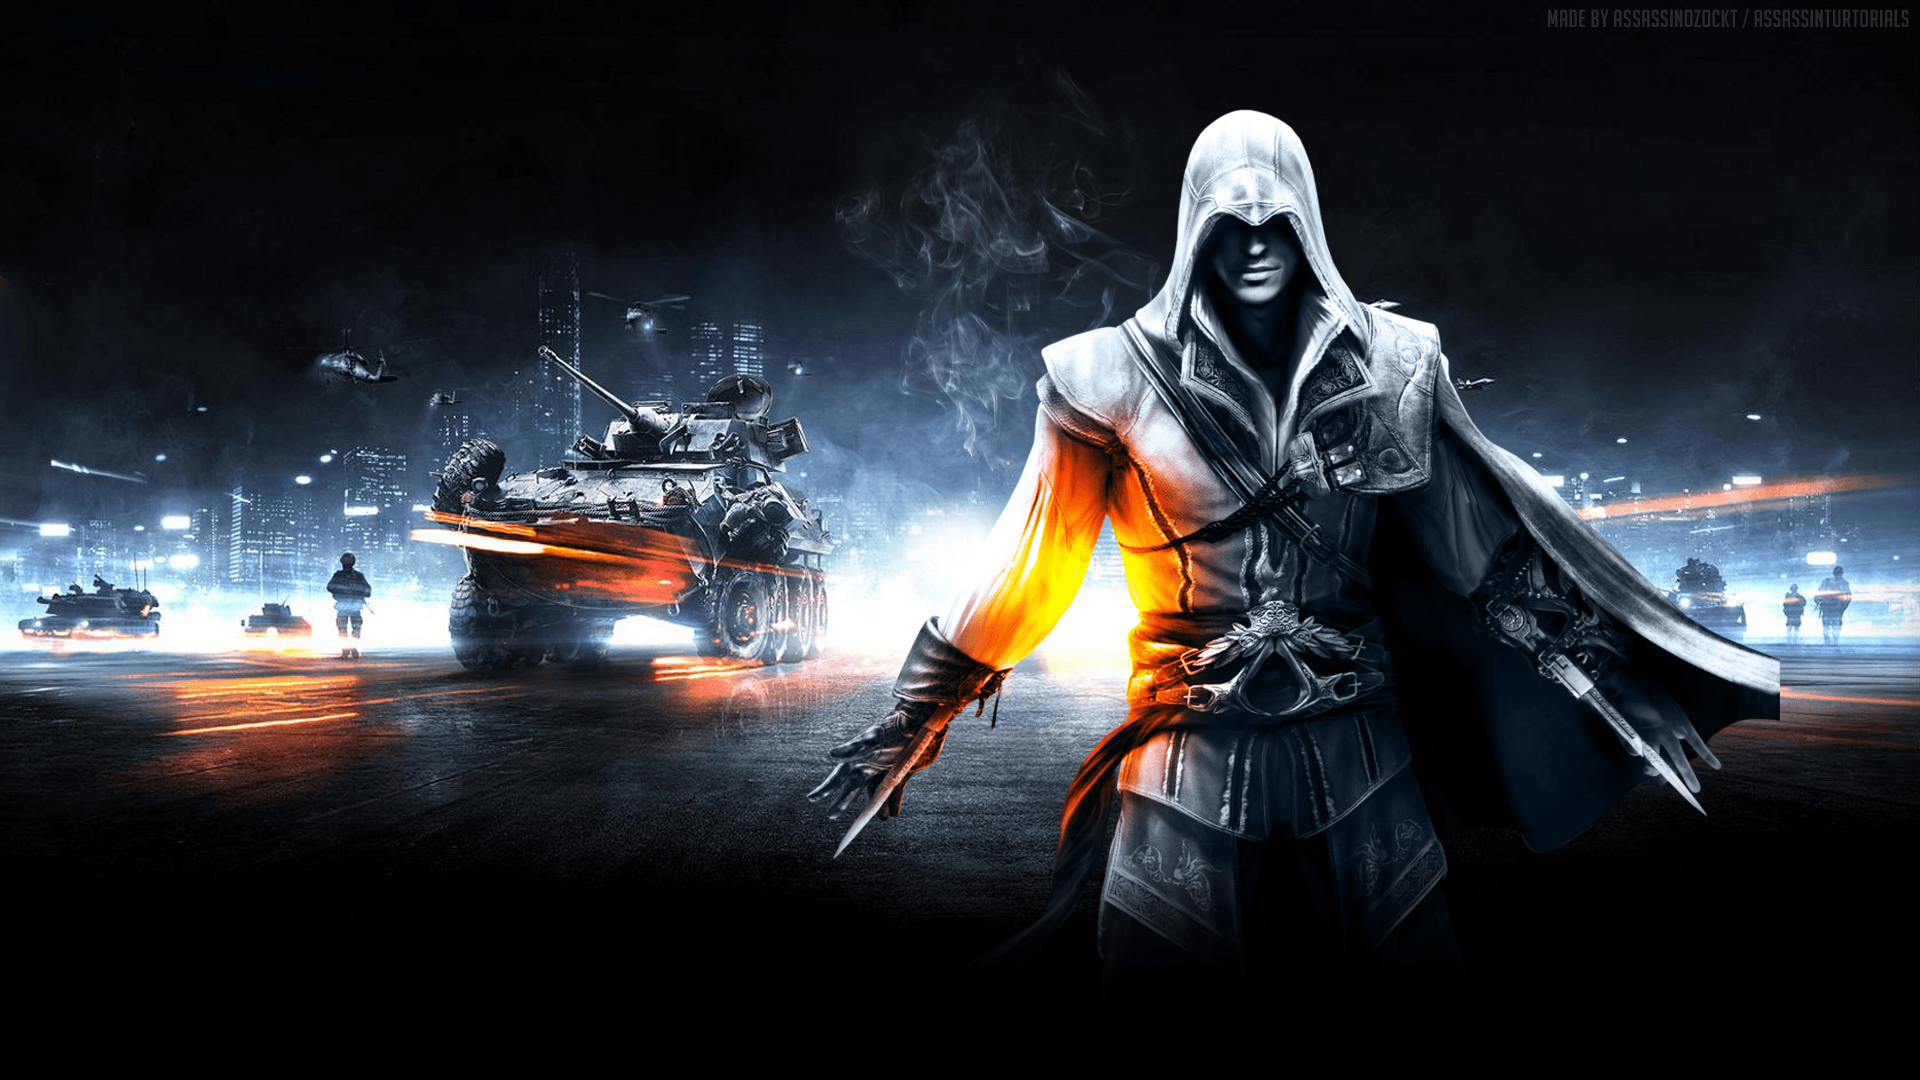 Cool gaming wallpapers hd